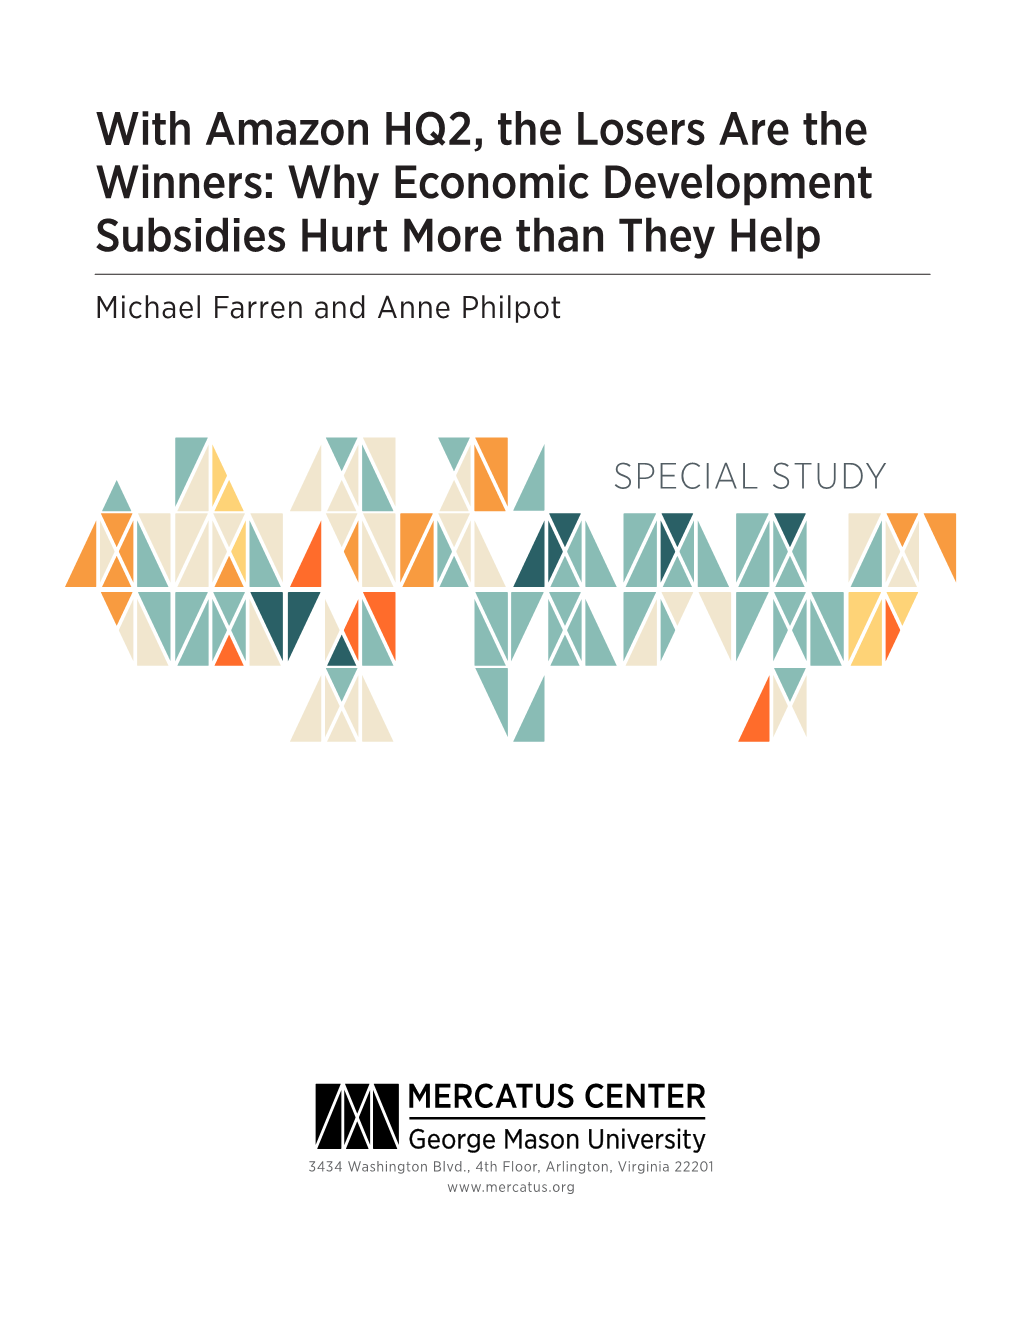 Why Economic Development Subsidies Hurt More Than They Help Michael Farren and Anne Philpot